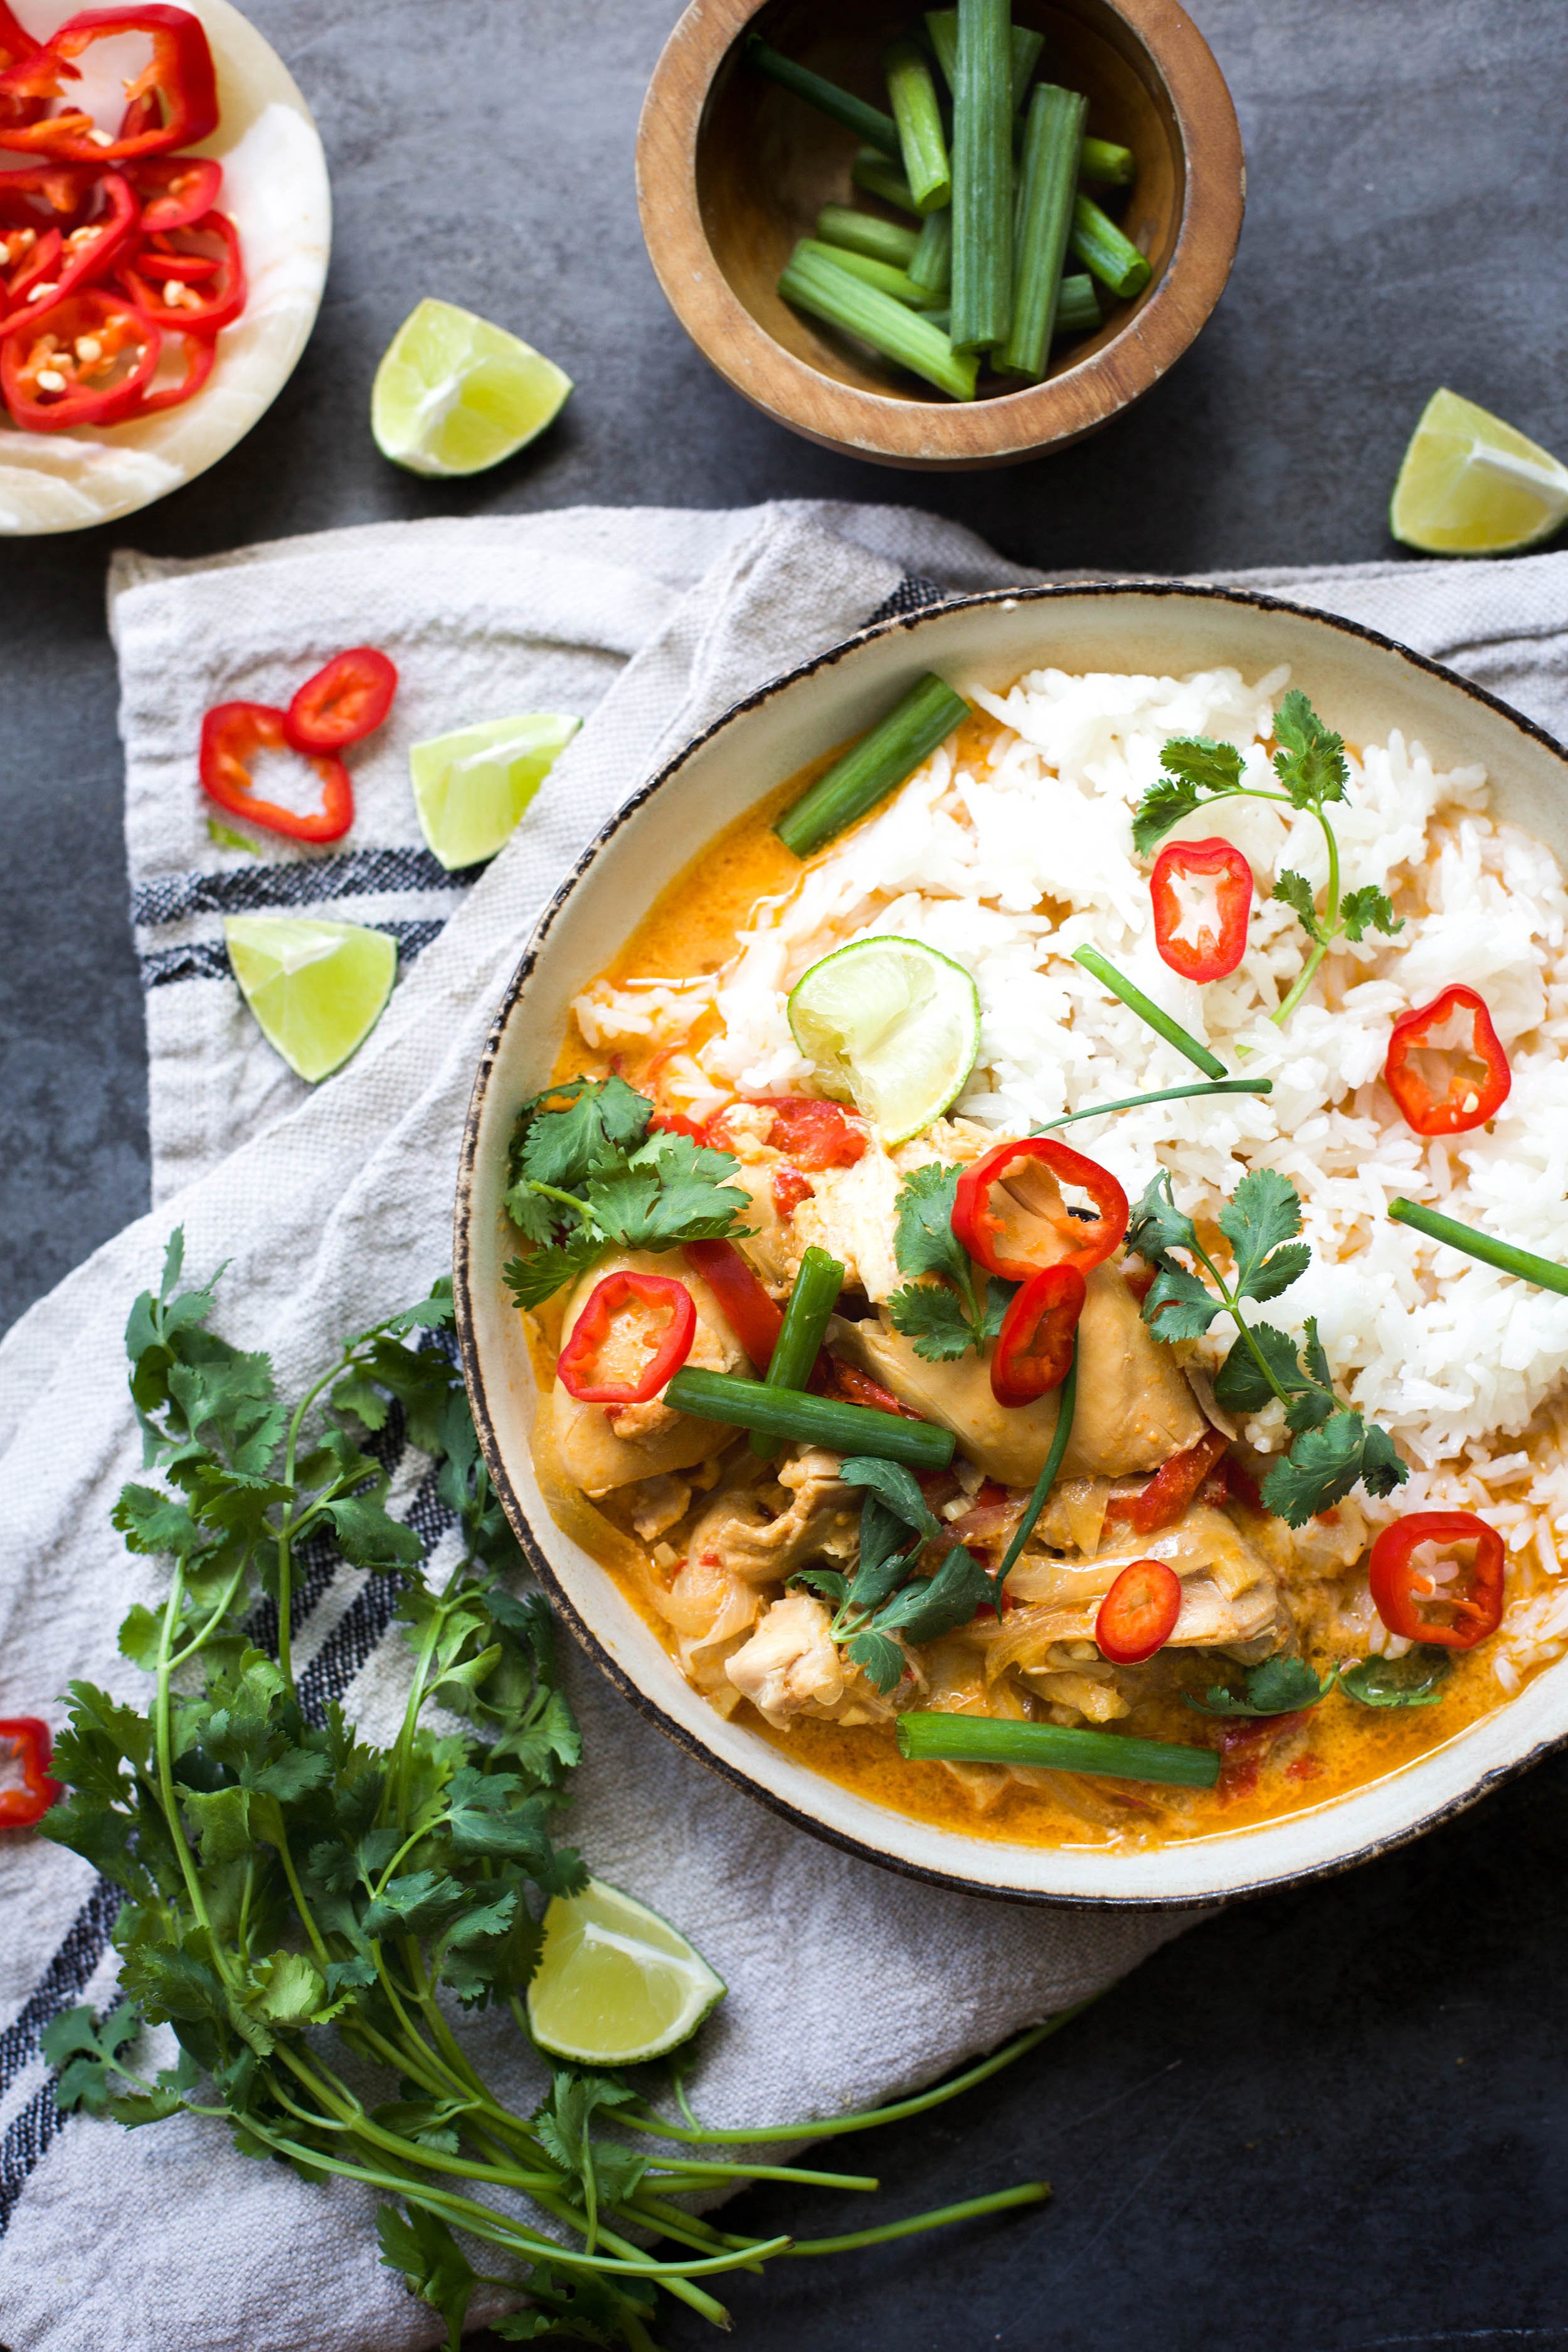 Slow Cooker Thai Red Curry Chicken and Veggies - The Defined Dish